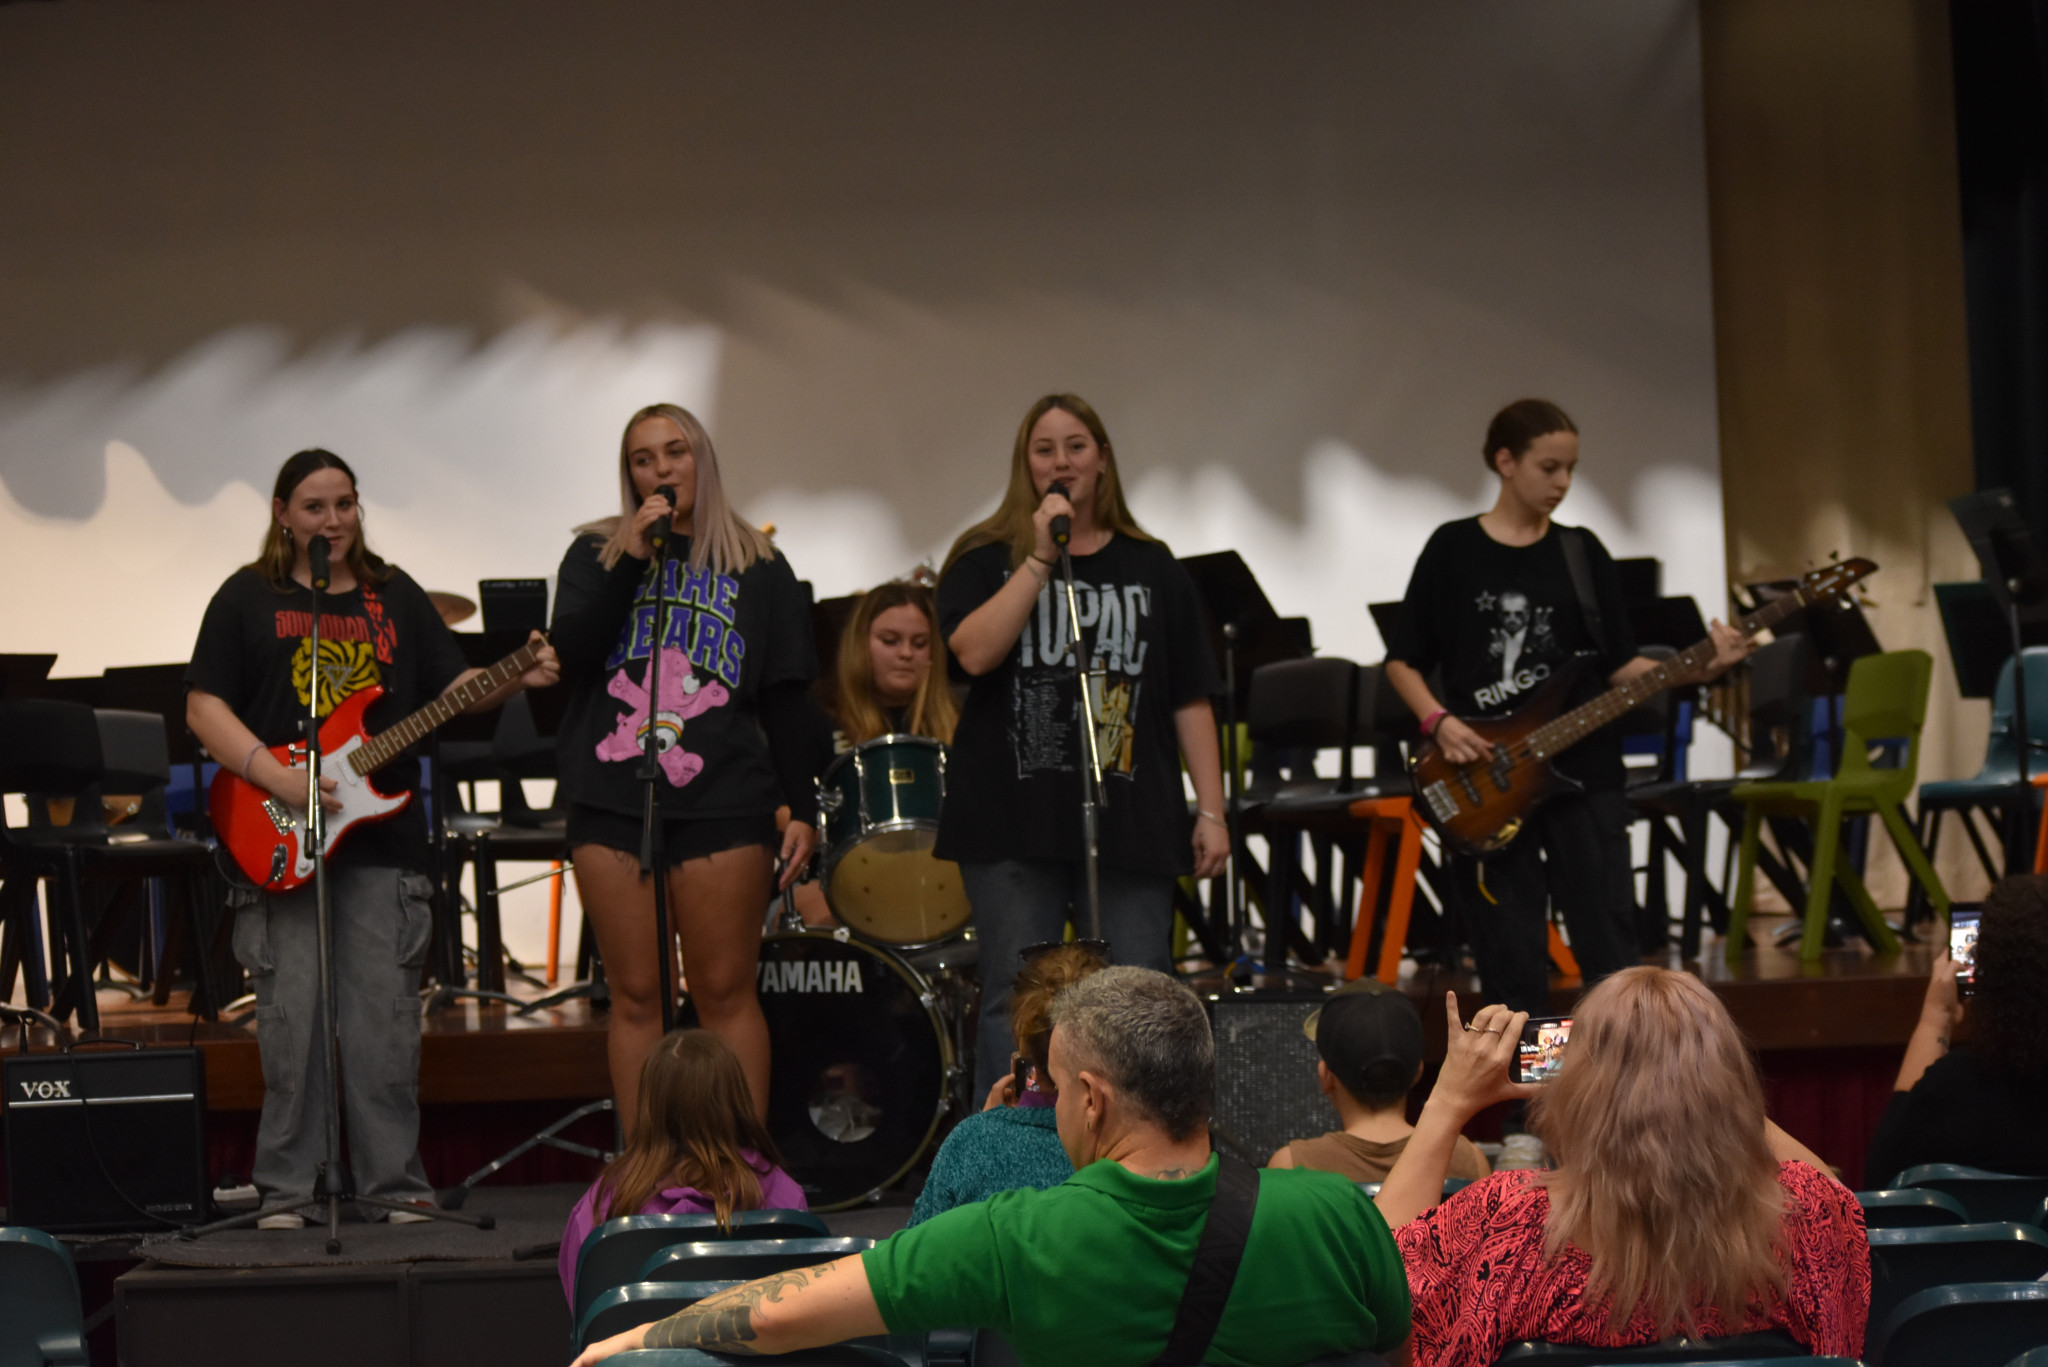 TSHS rock band won the Rock Band trophy for performing ‘Smells Like Teen Spirit’.